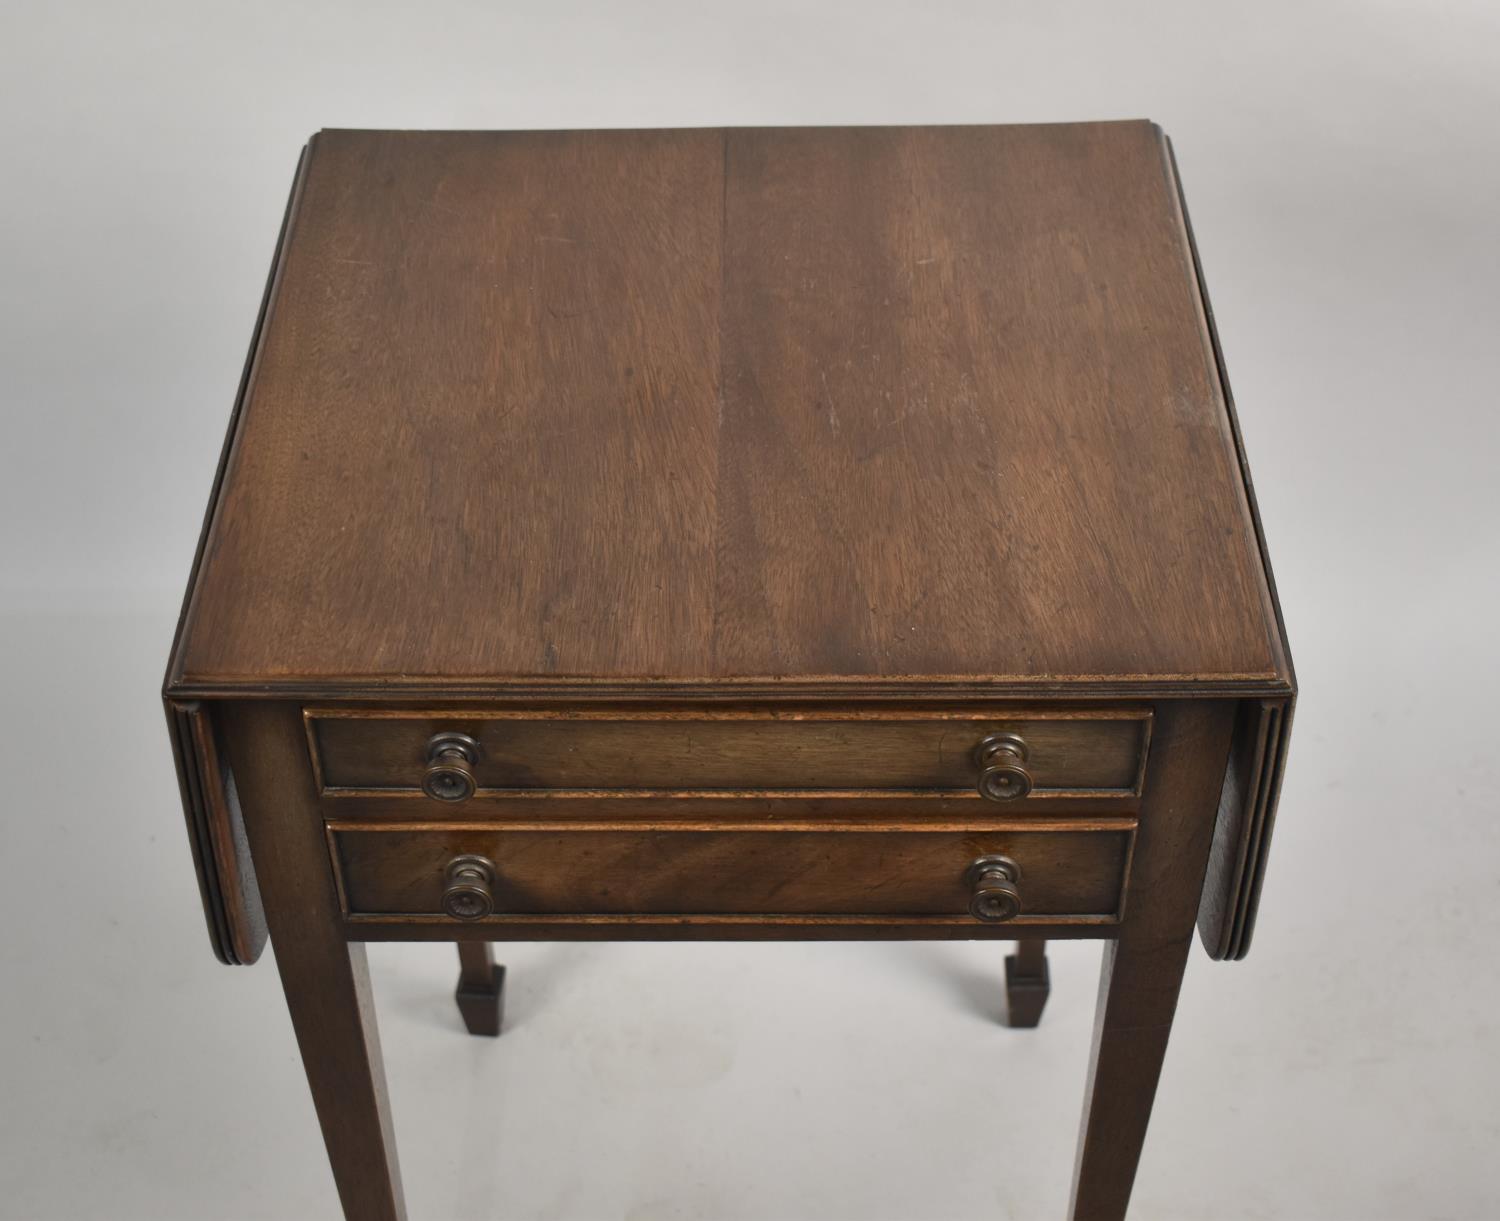 A Reproduction Drop Leaf Work Table with Two Drawers, 43cm Wide when Closed and 70cm high, Square - Image 2 of 2